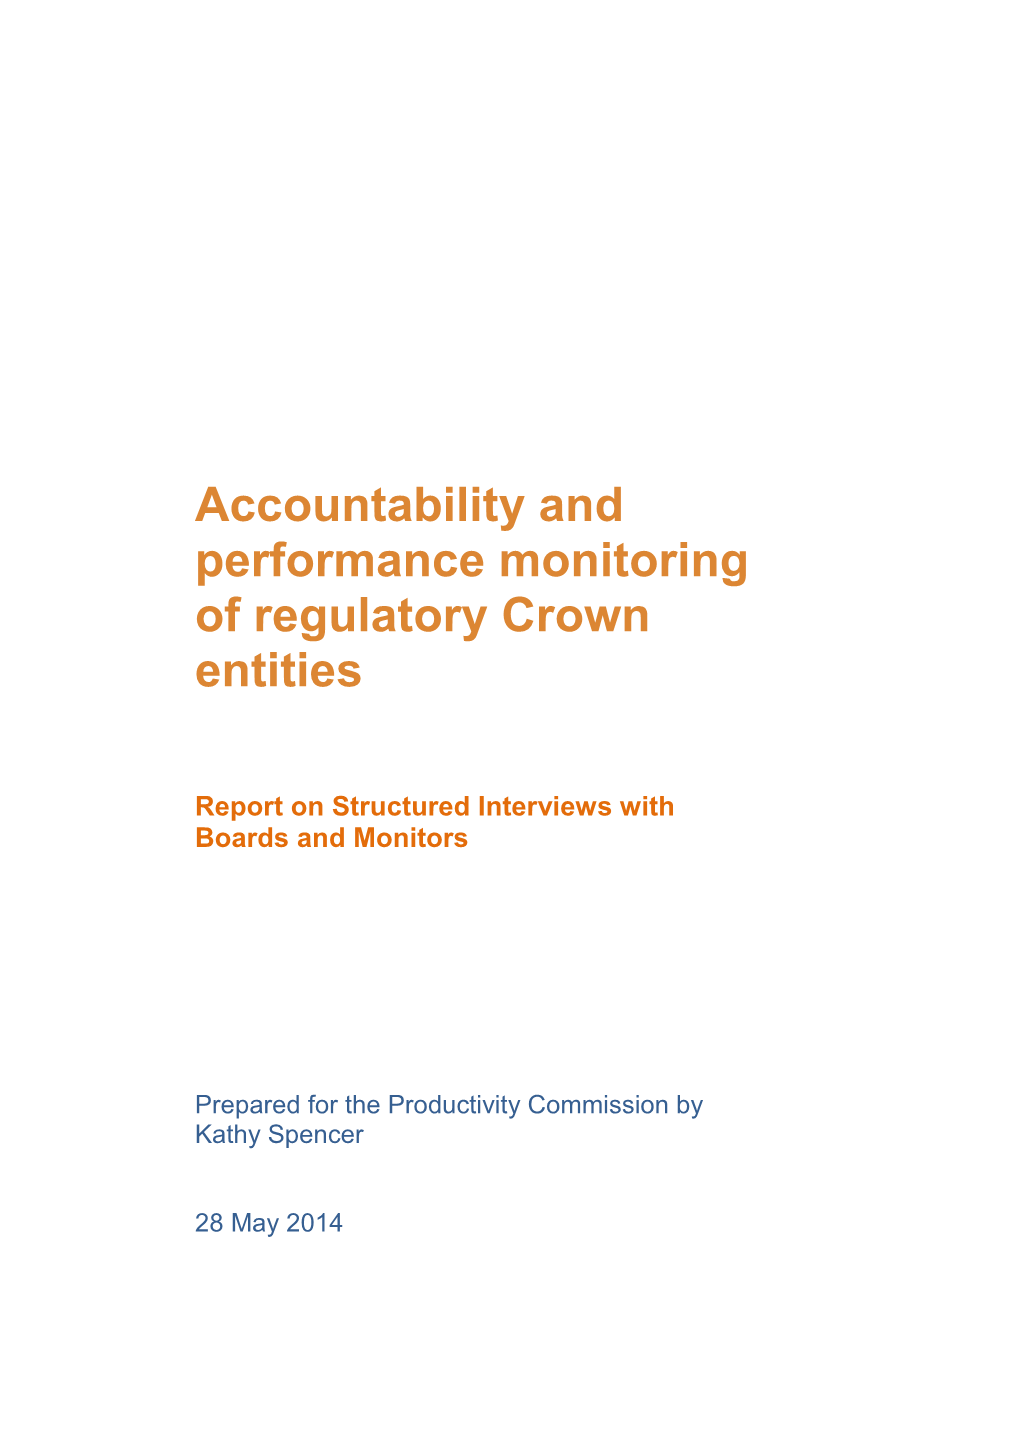 Accountability and Performance Monitoring of Regulatory Crown Entities